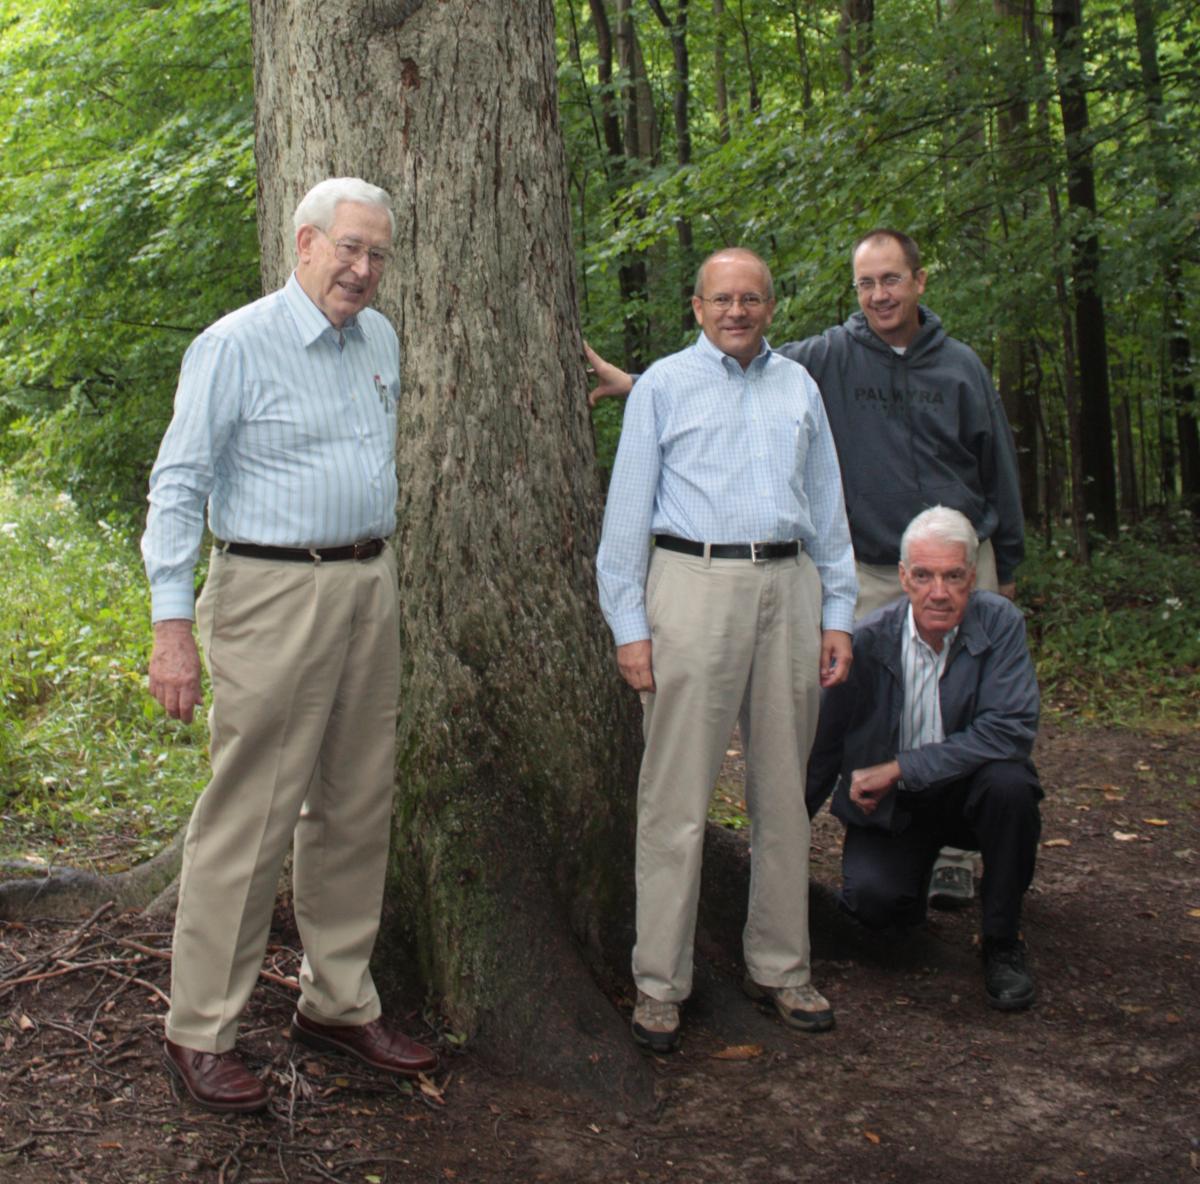 "Larry Porter, Kent Jackson, Richard Holzapfel, and Don Enders standing next to witness tree"